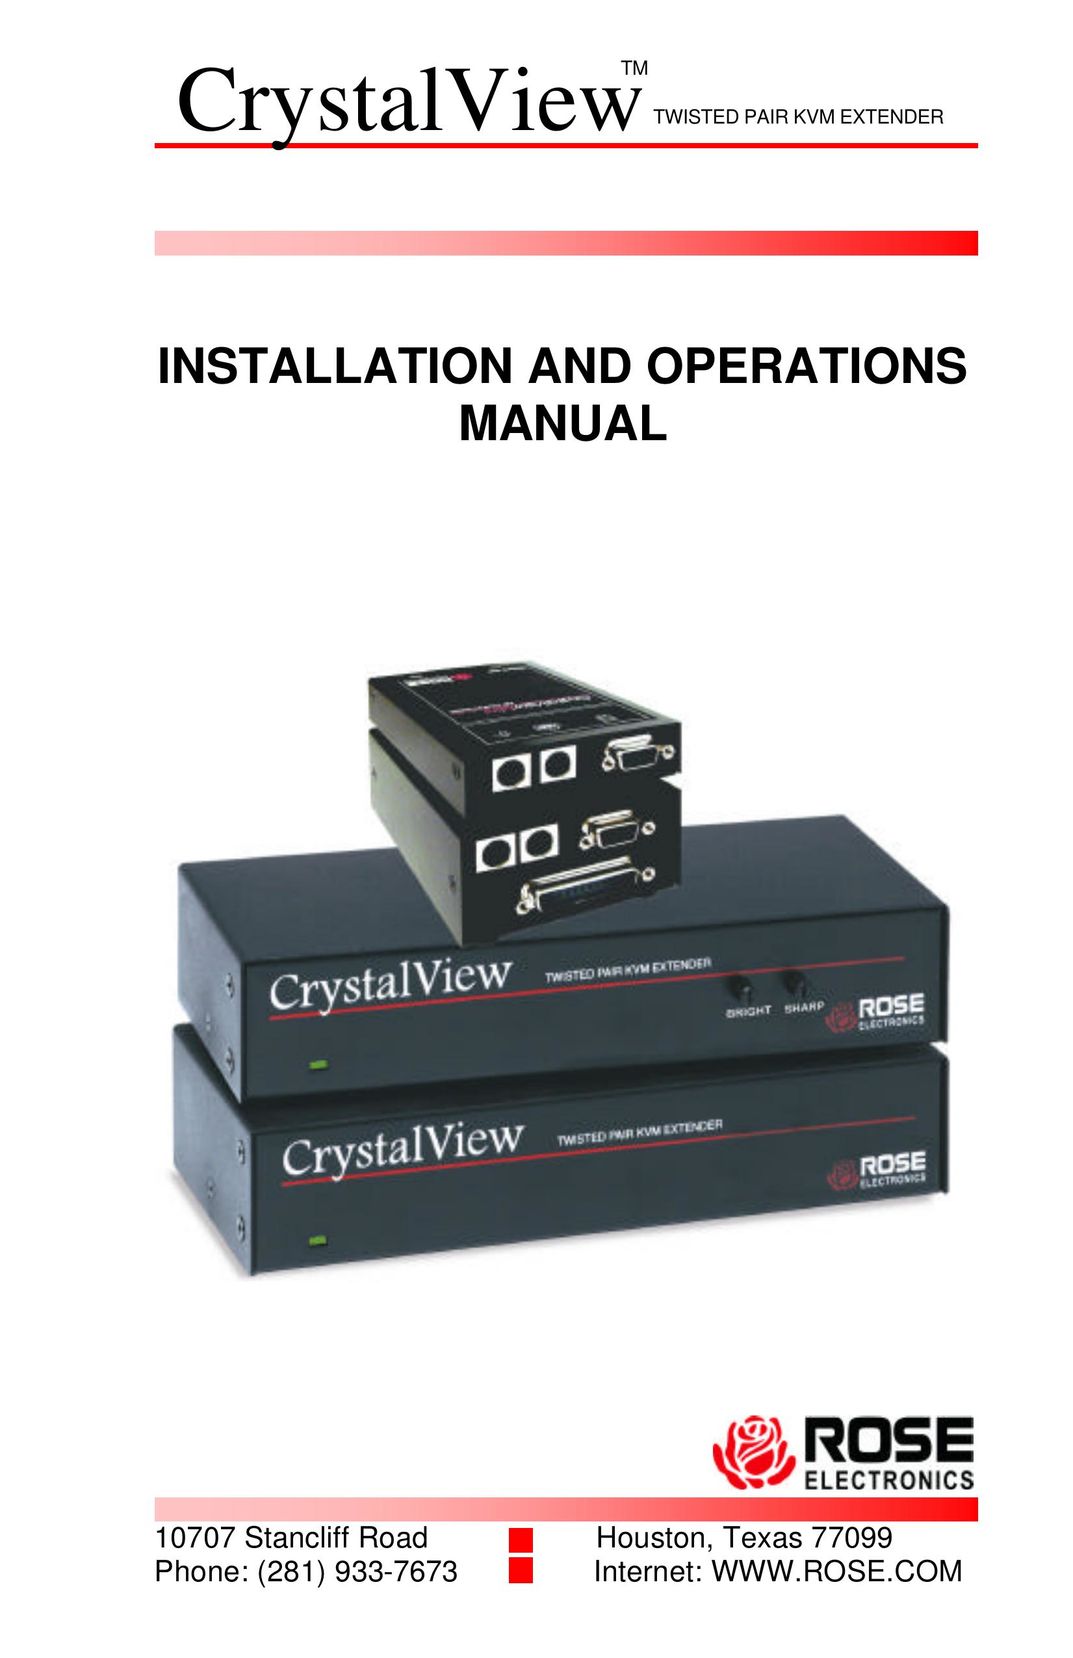 Rose electronic CrystalView Network Card User Manual